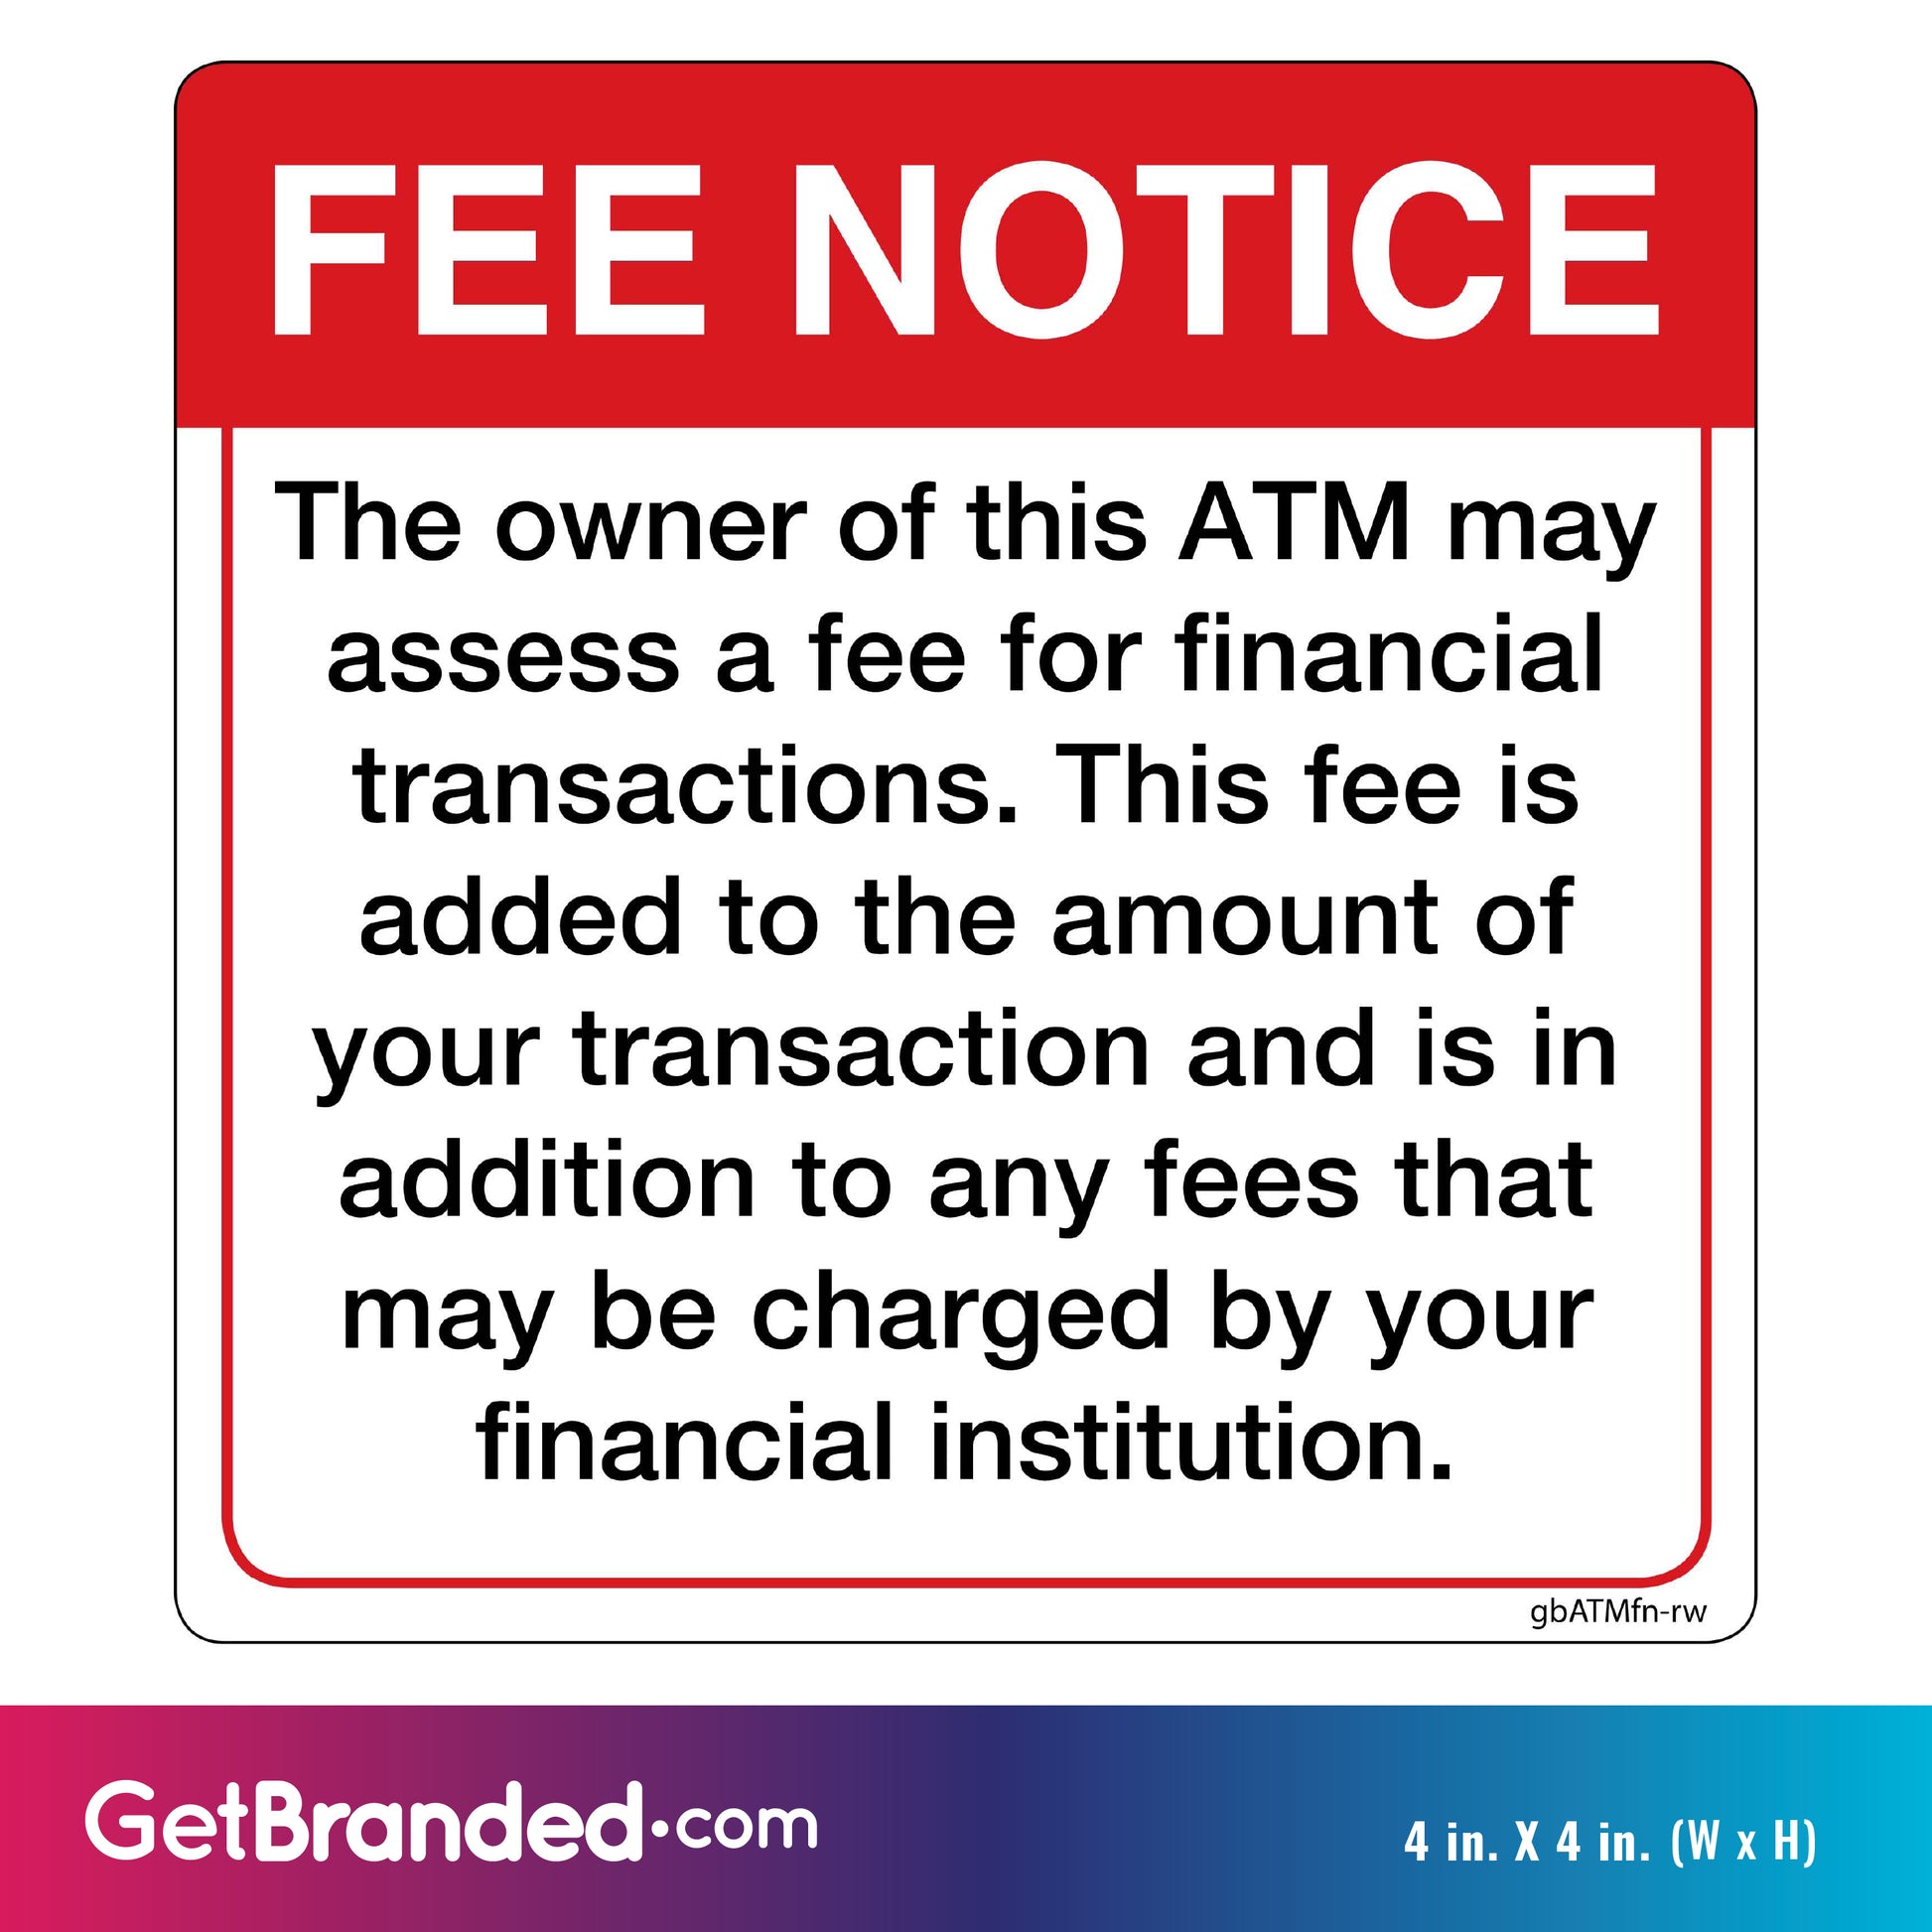 Fee Notice Decal, White with Red Outline size guide.